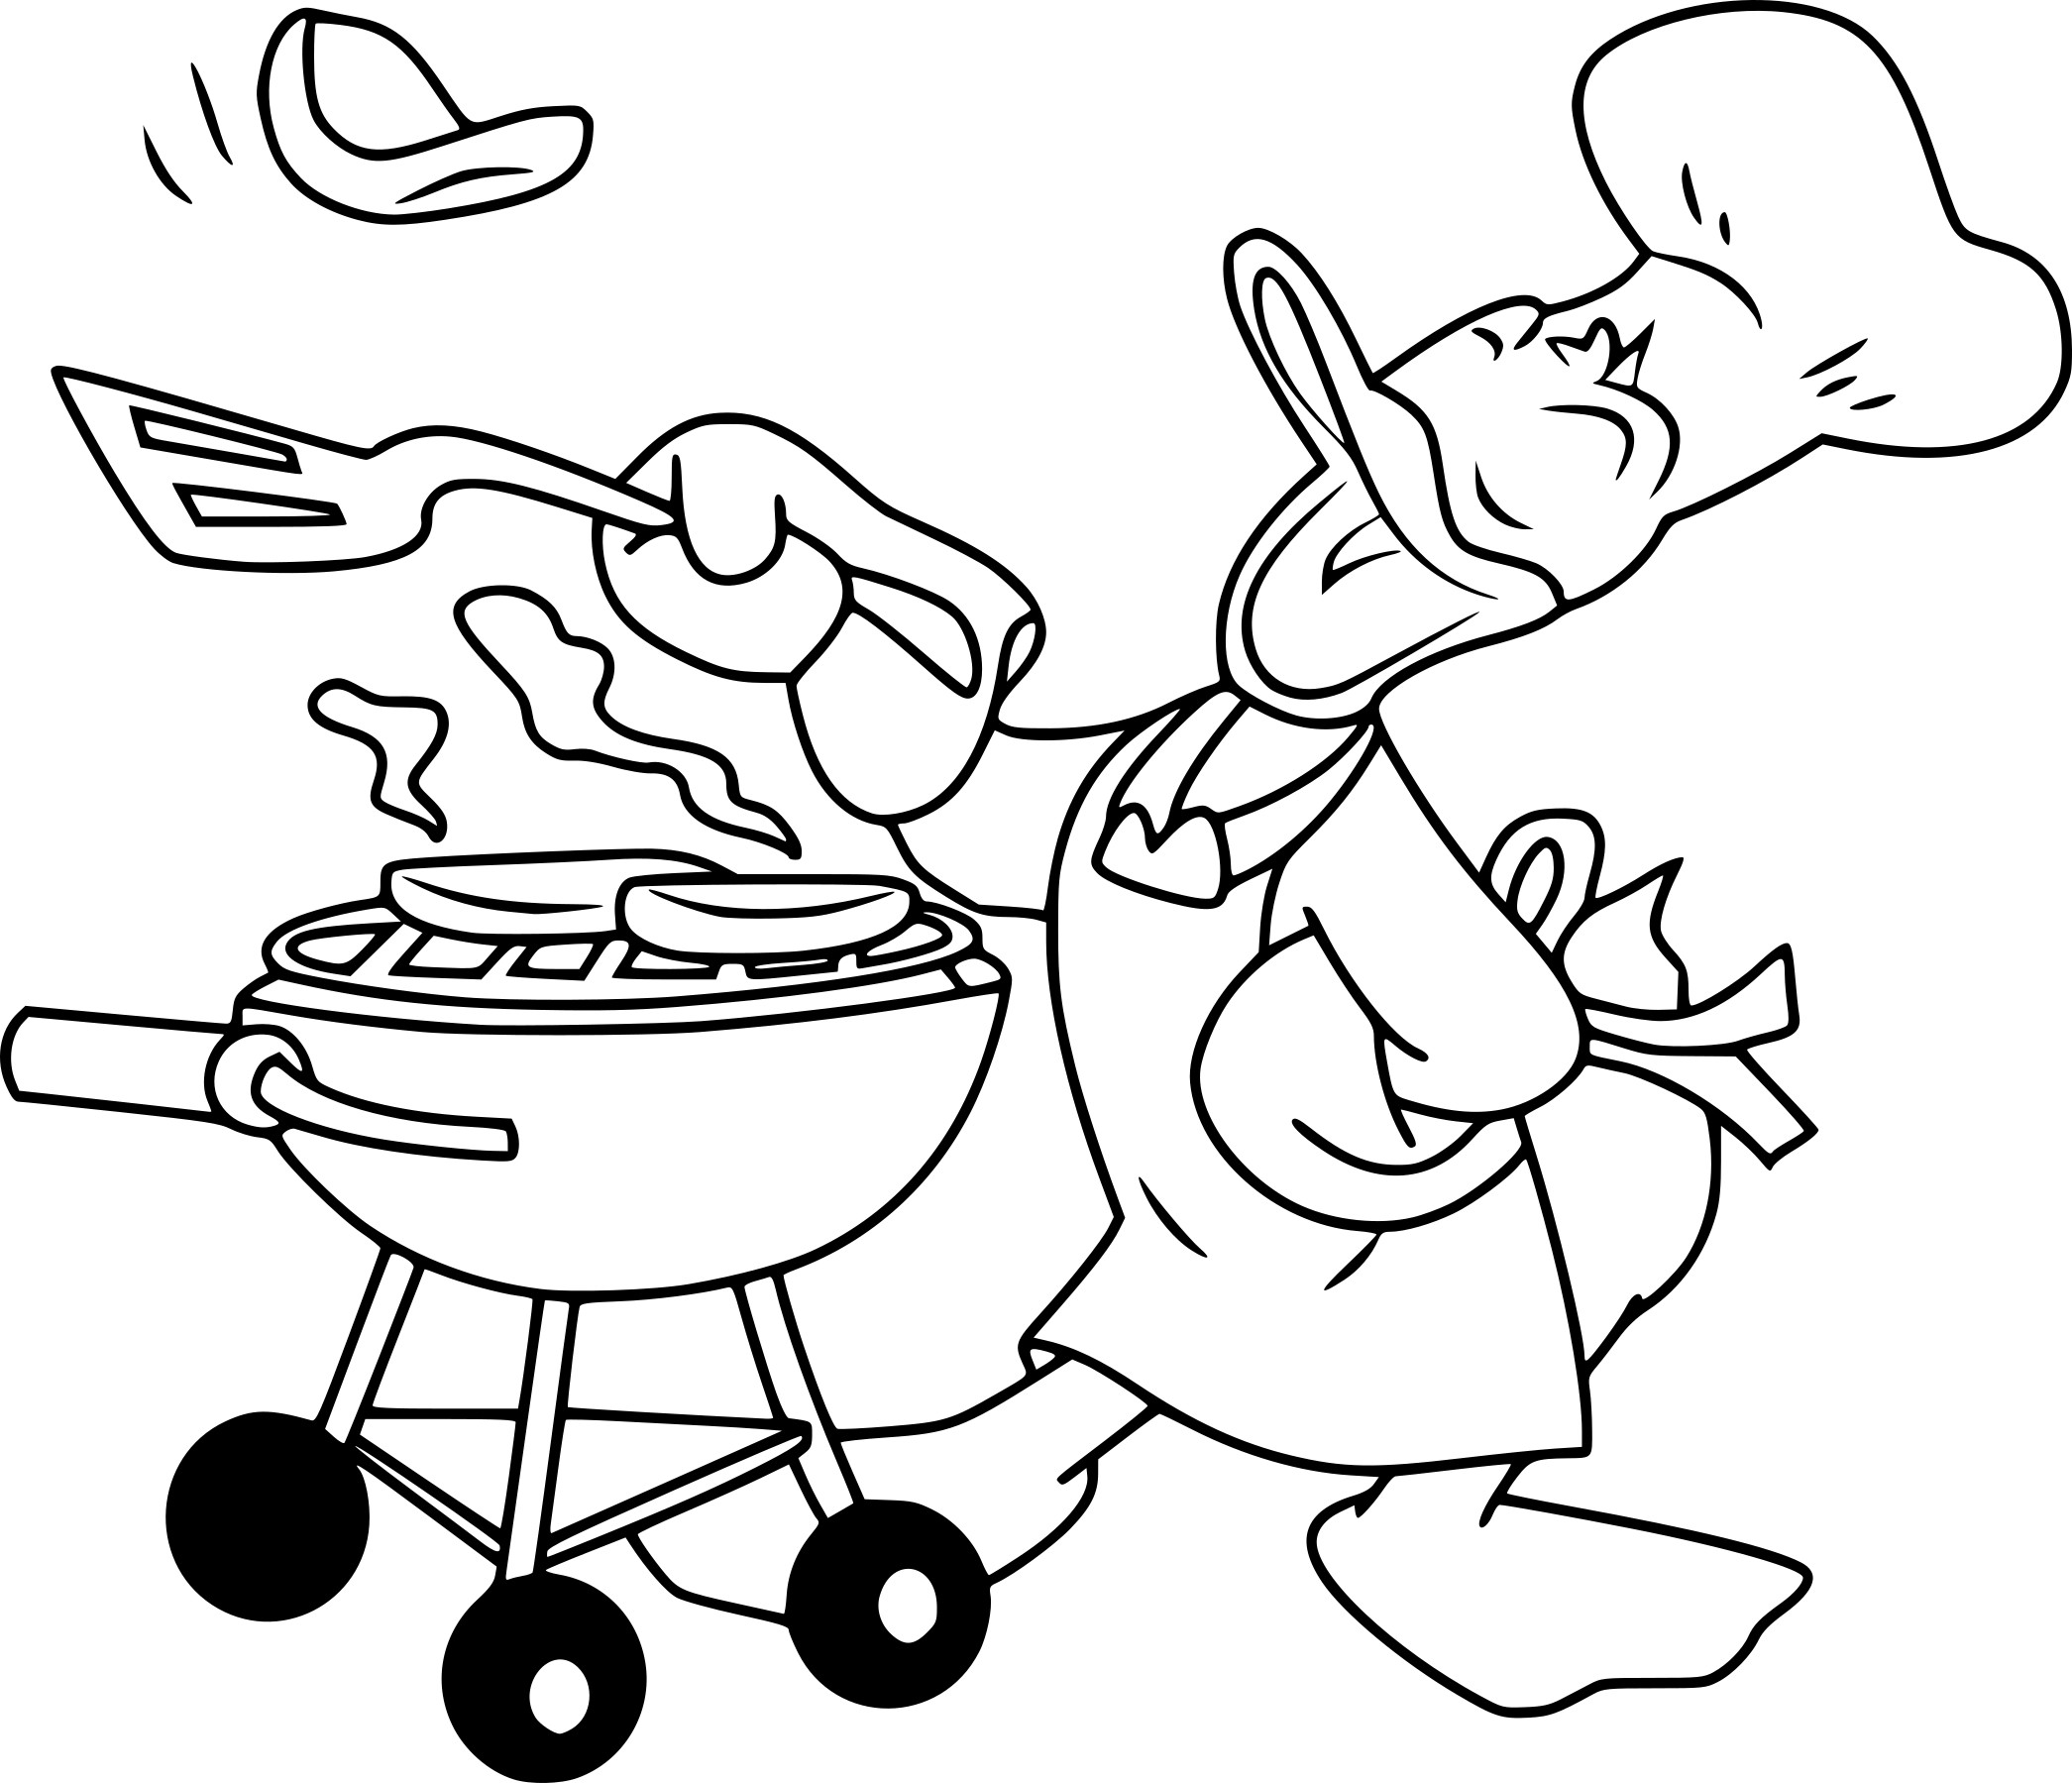 Donald drawing and coloring page